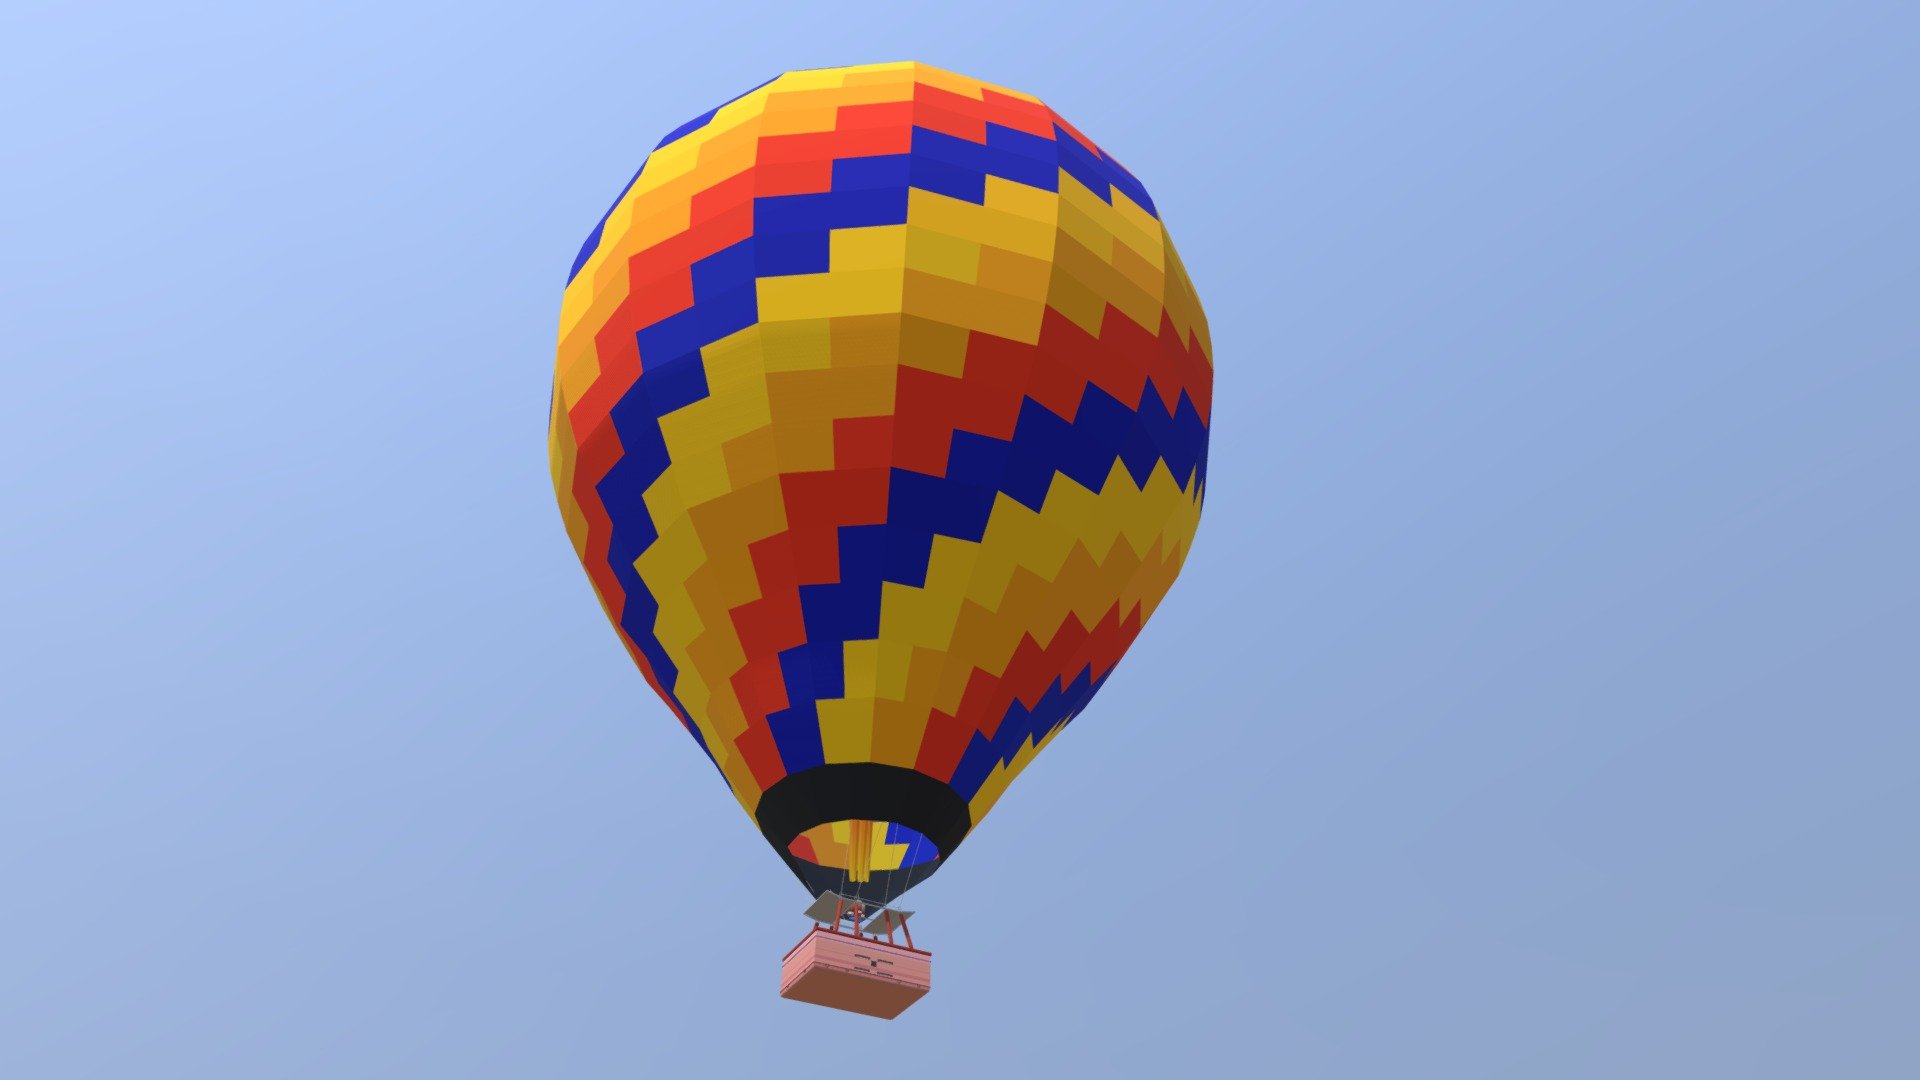 A low poly balloon made for a challenge in a discord channel of transports in a city 3d model